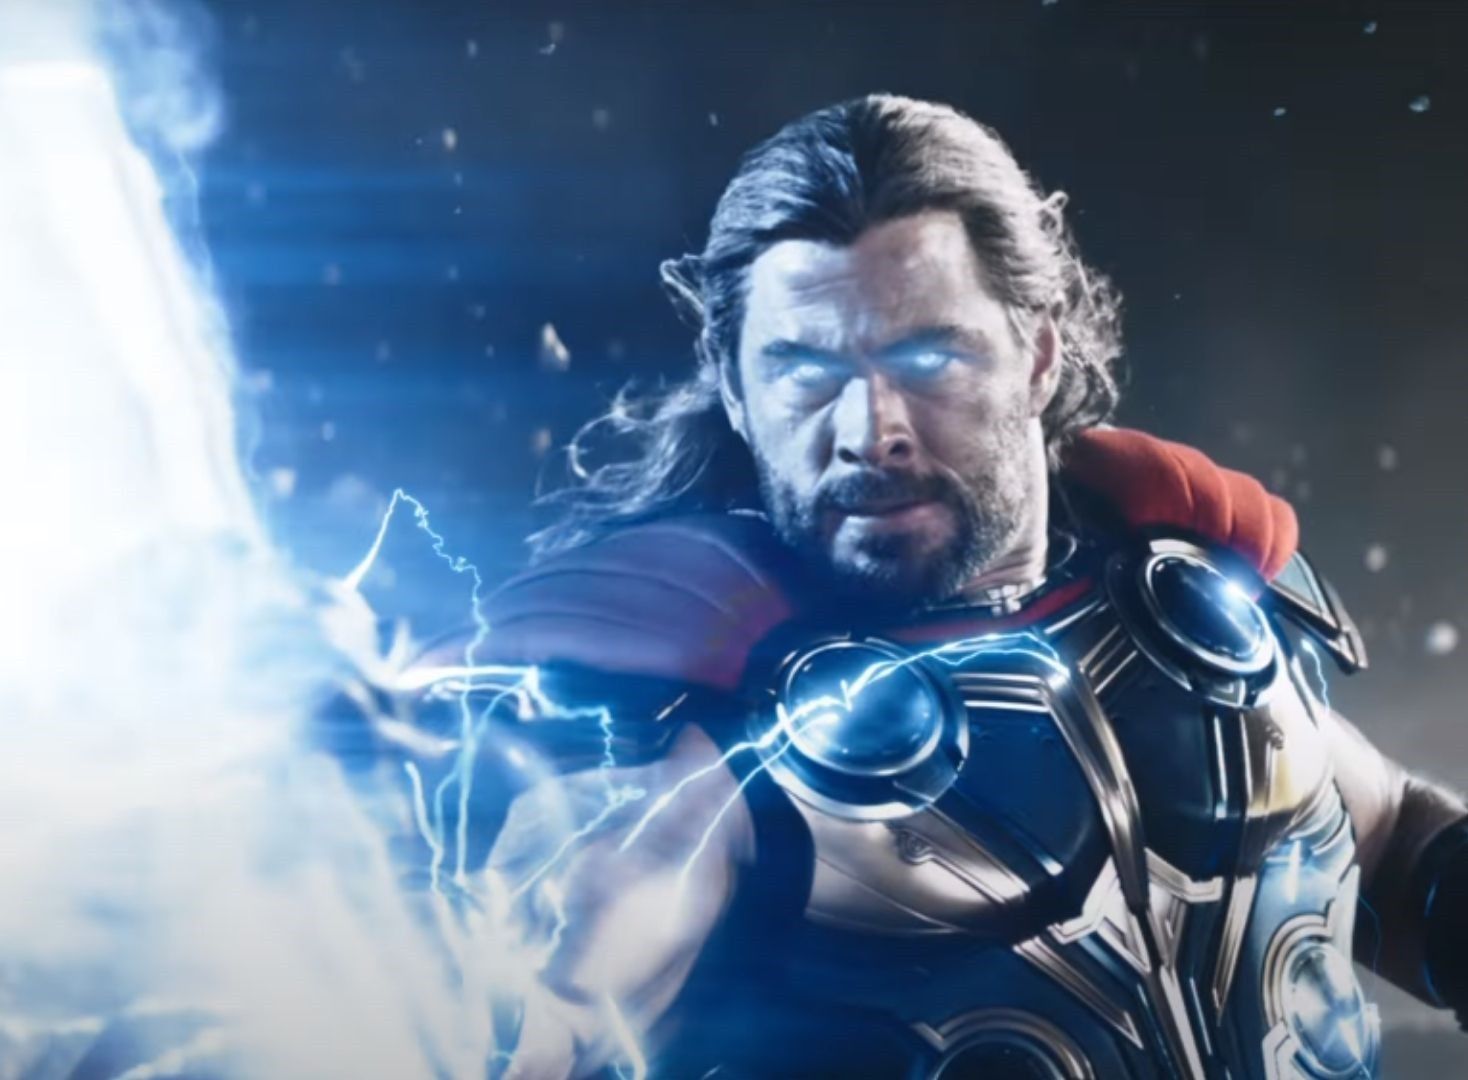 Natalie Portman, Christian Bale take center stage in 'Thor: Love and Thunder ' official trailer